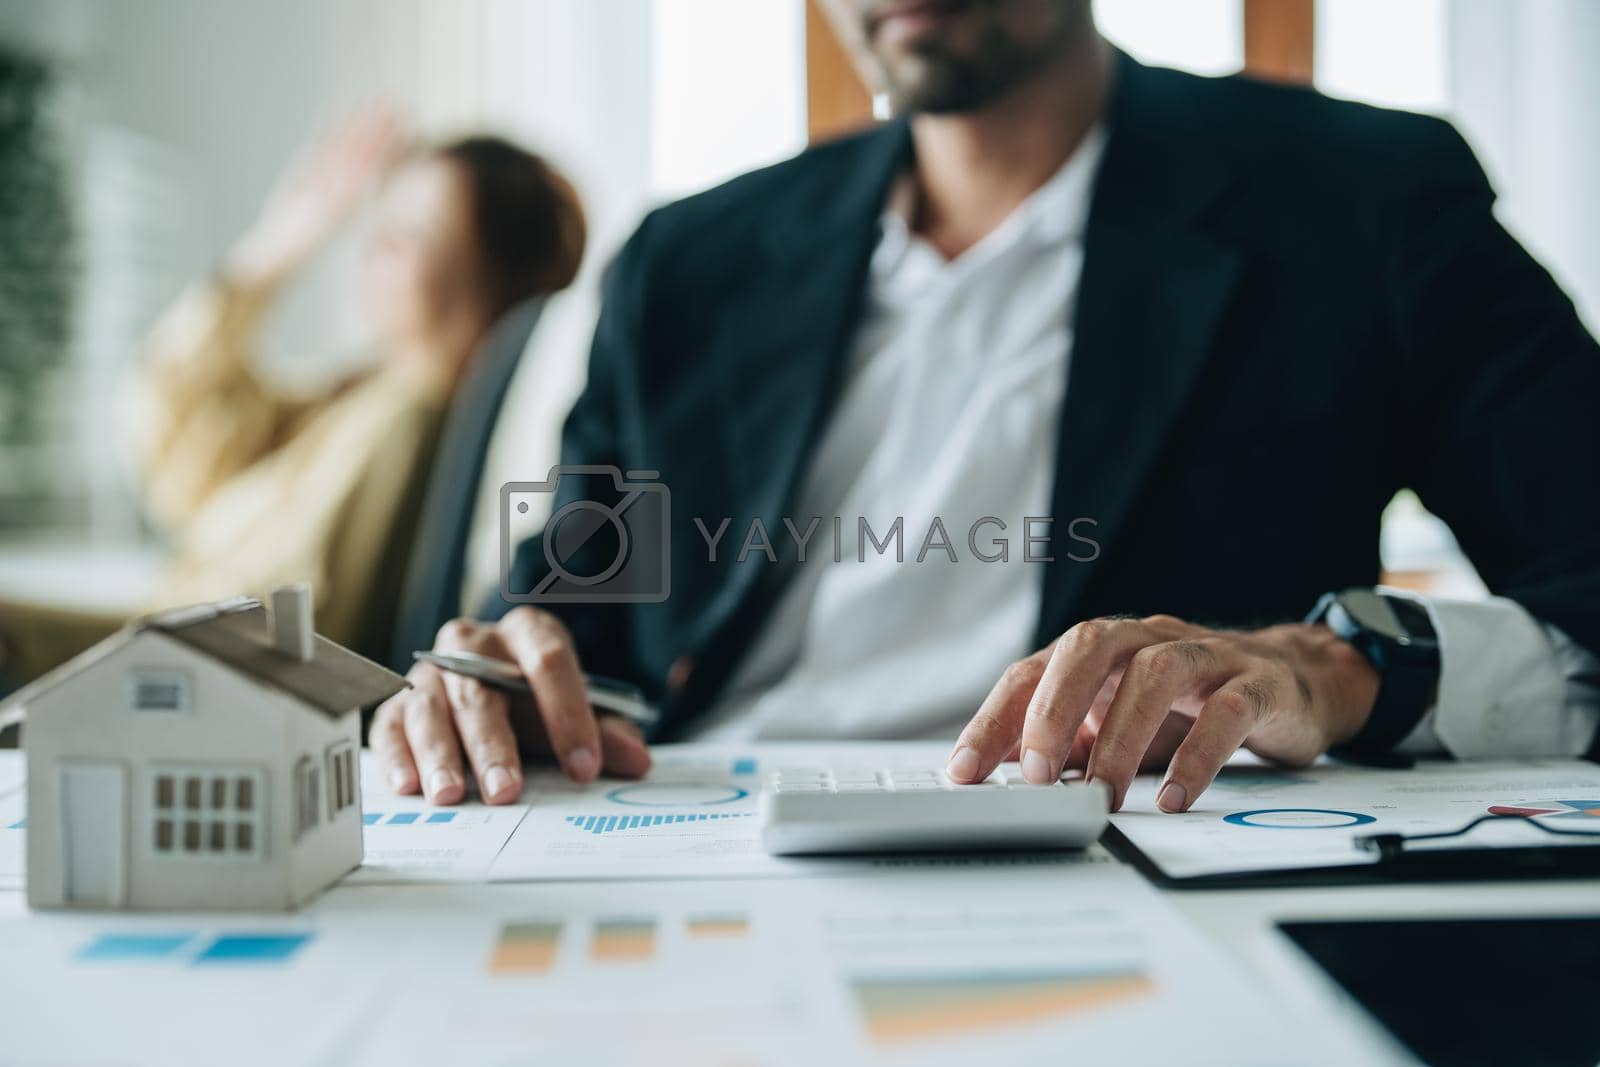 Royalty free image of Bank loan workers are using calculators to calculate home loan interest rates for customers to assess their investment capabilities using key documents at working by Manastrong